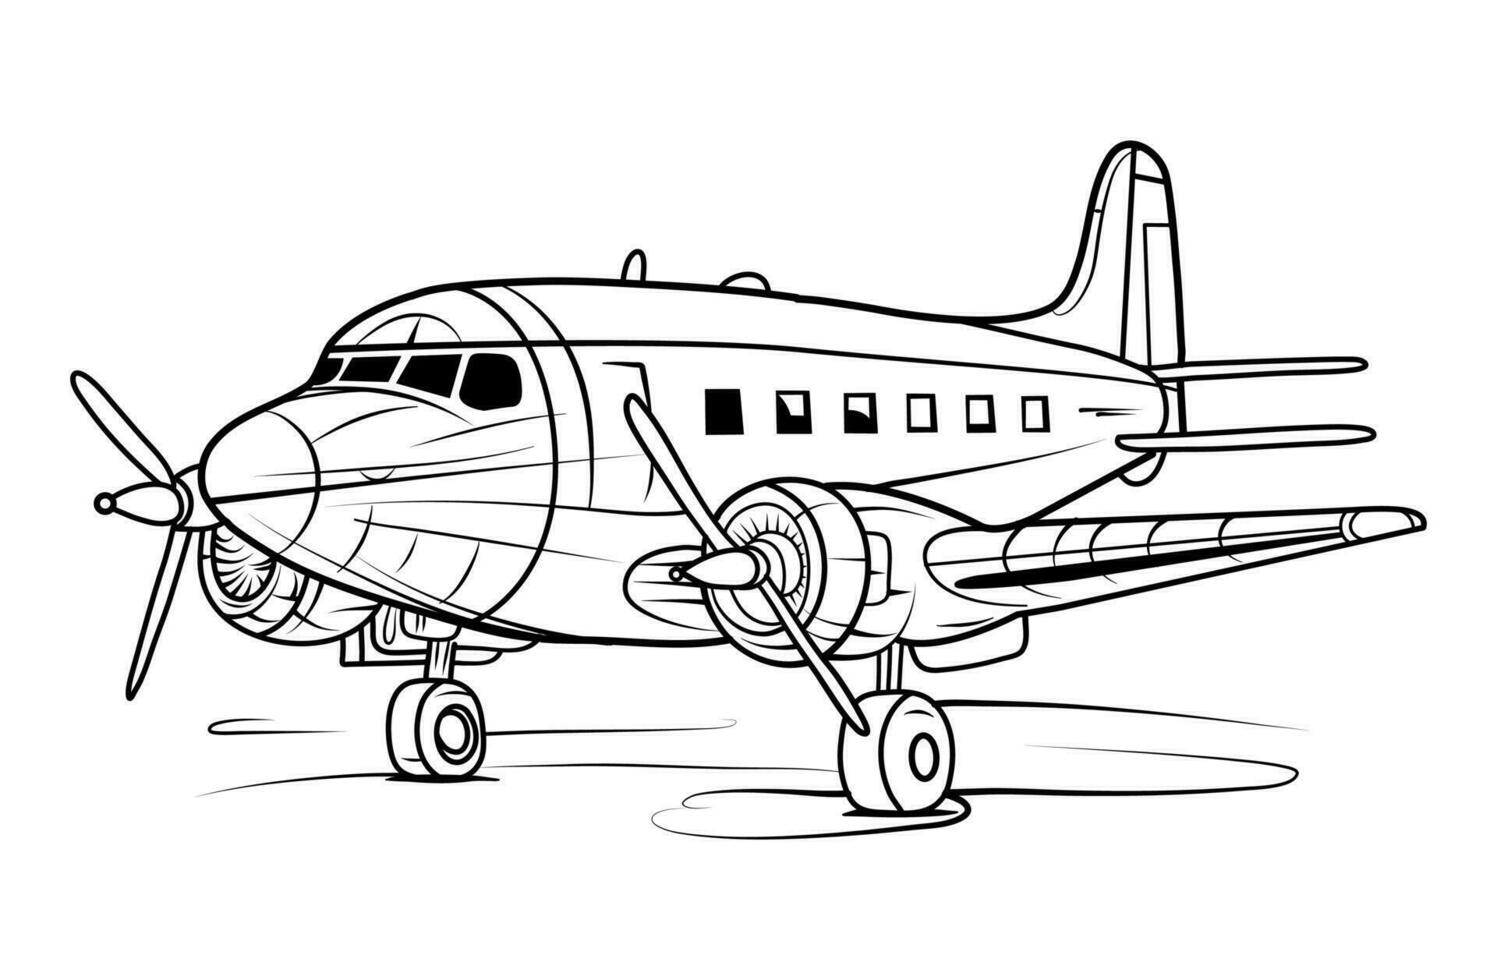 Hand Drawn Airplane Coloring Book Page for Kids. Airplane Line Drawing vector